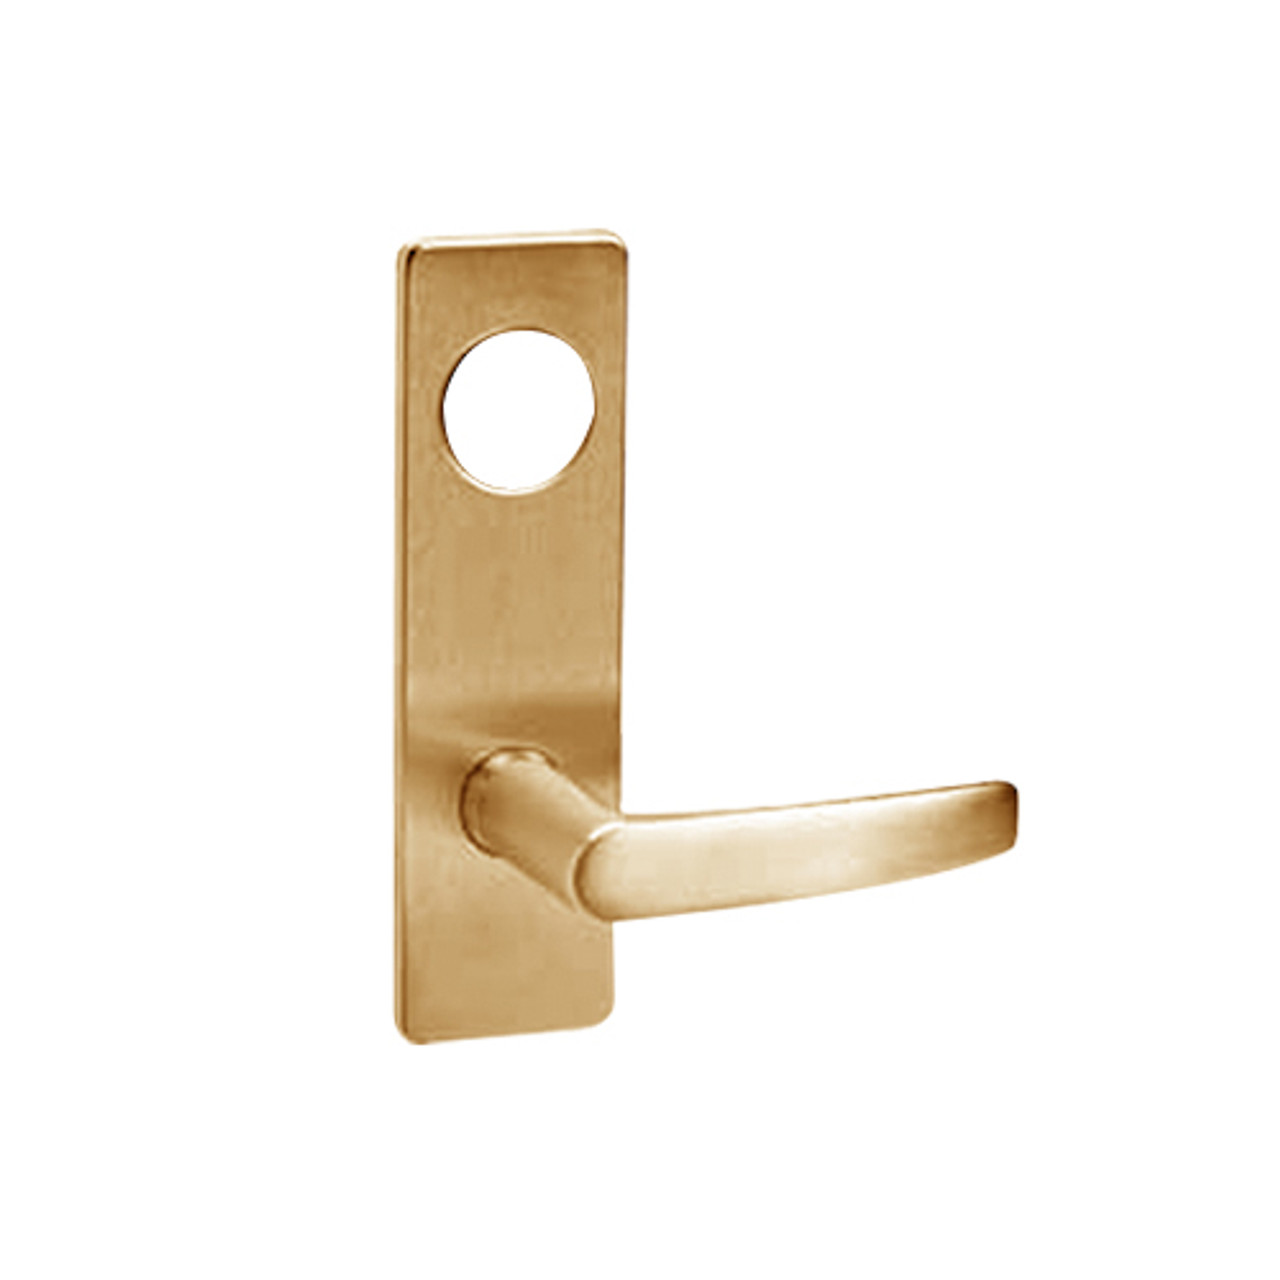 ML2057-ASN-612-CL7 Corbin Russwin ML2000 Series IC 7-Pin Less Core Mortise Storeroom Locksets with Armstrong Lever in Satin Bronze